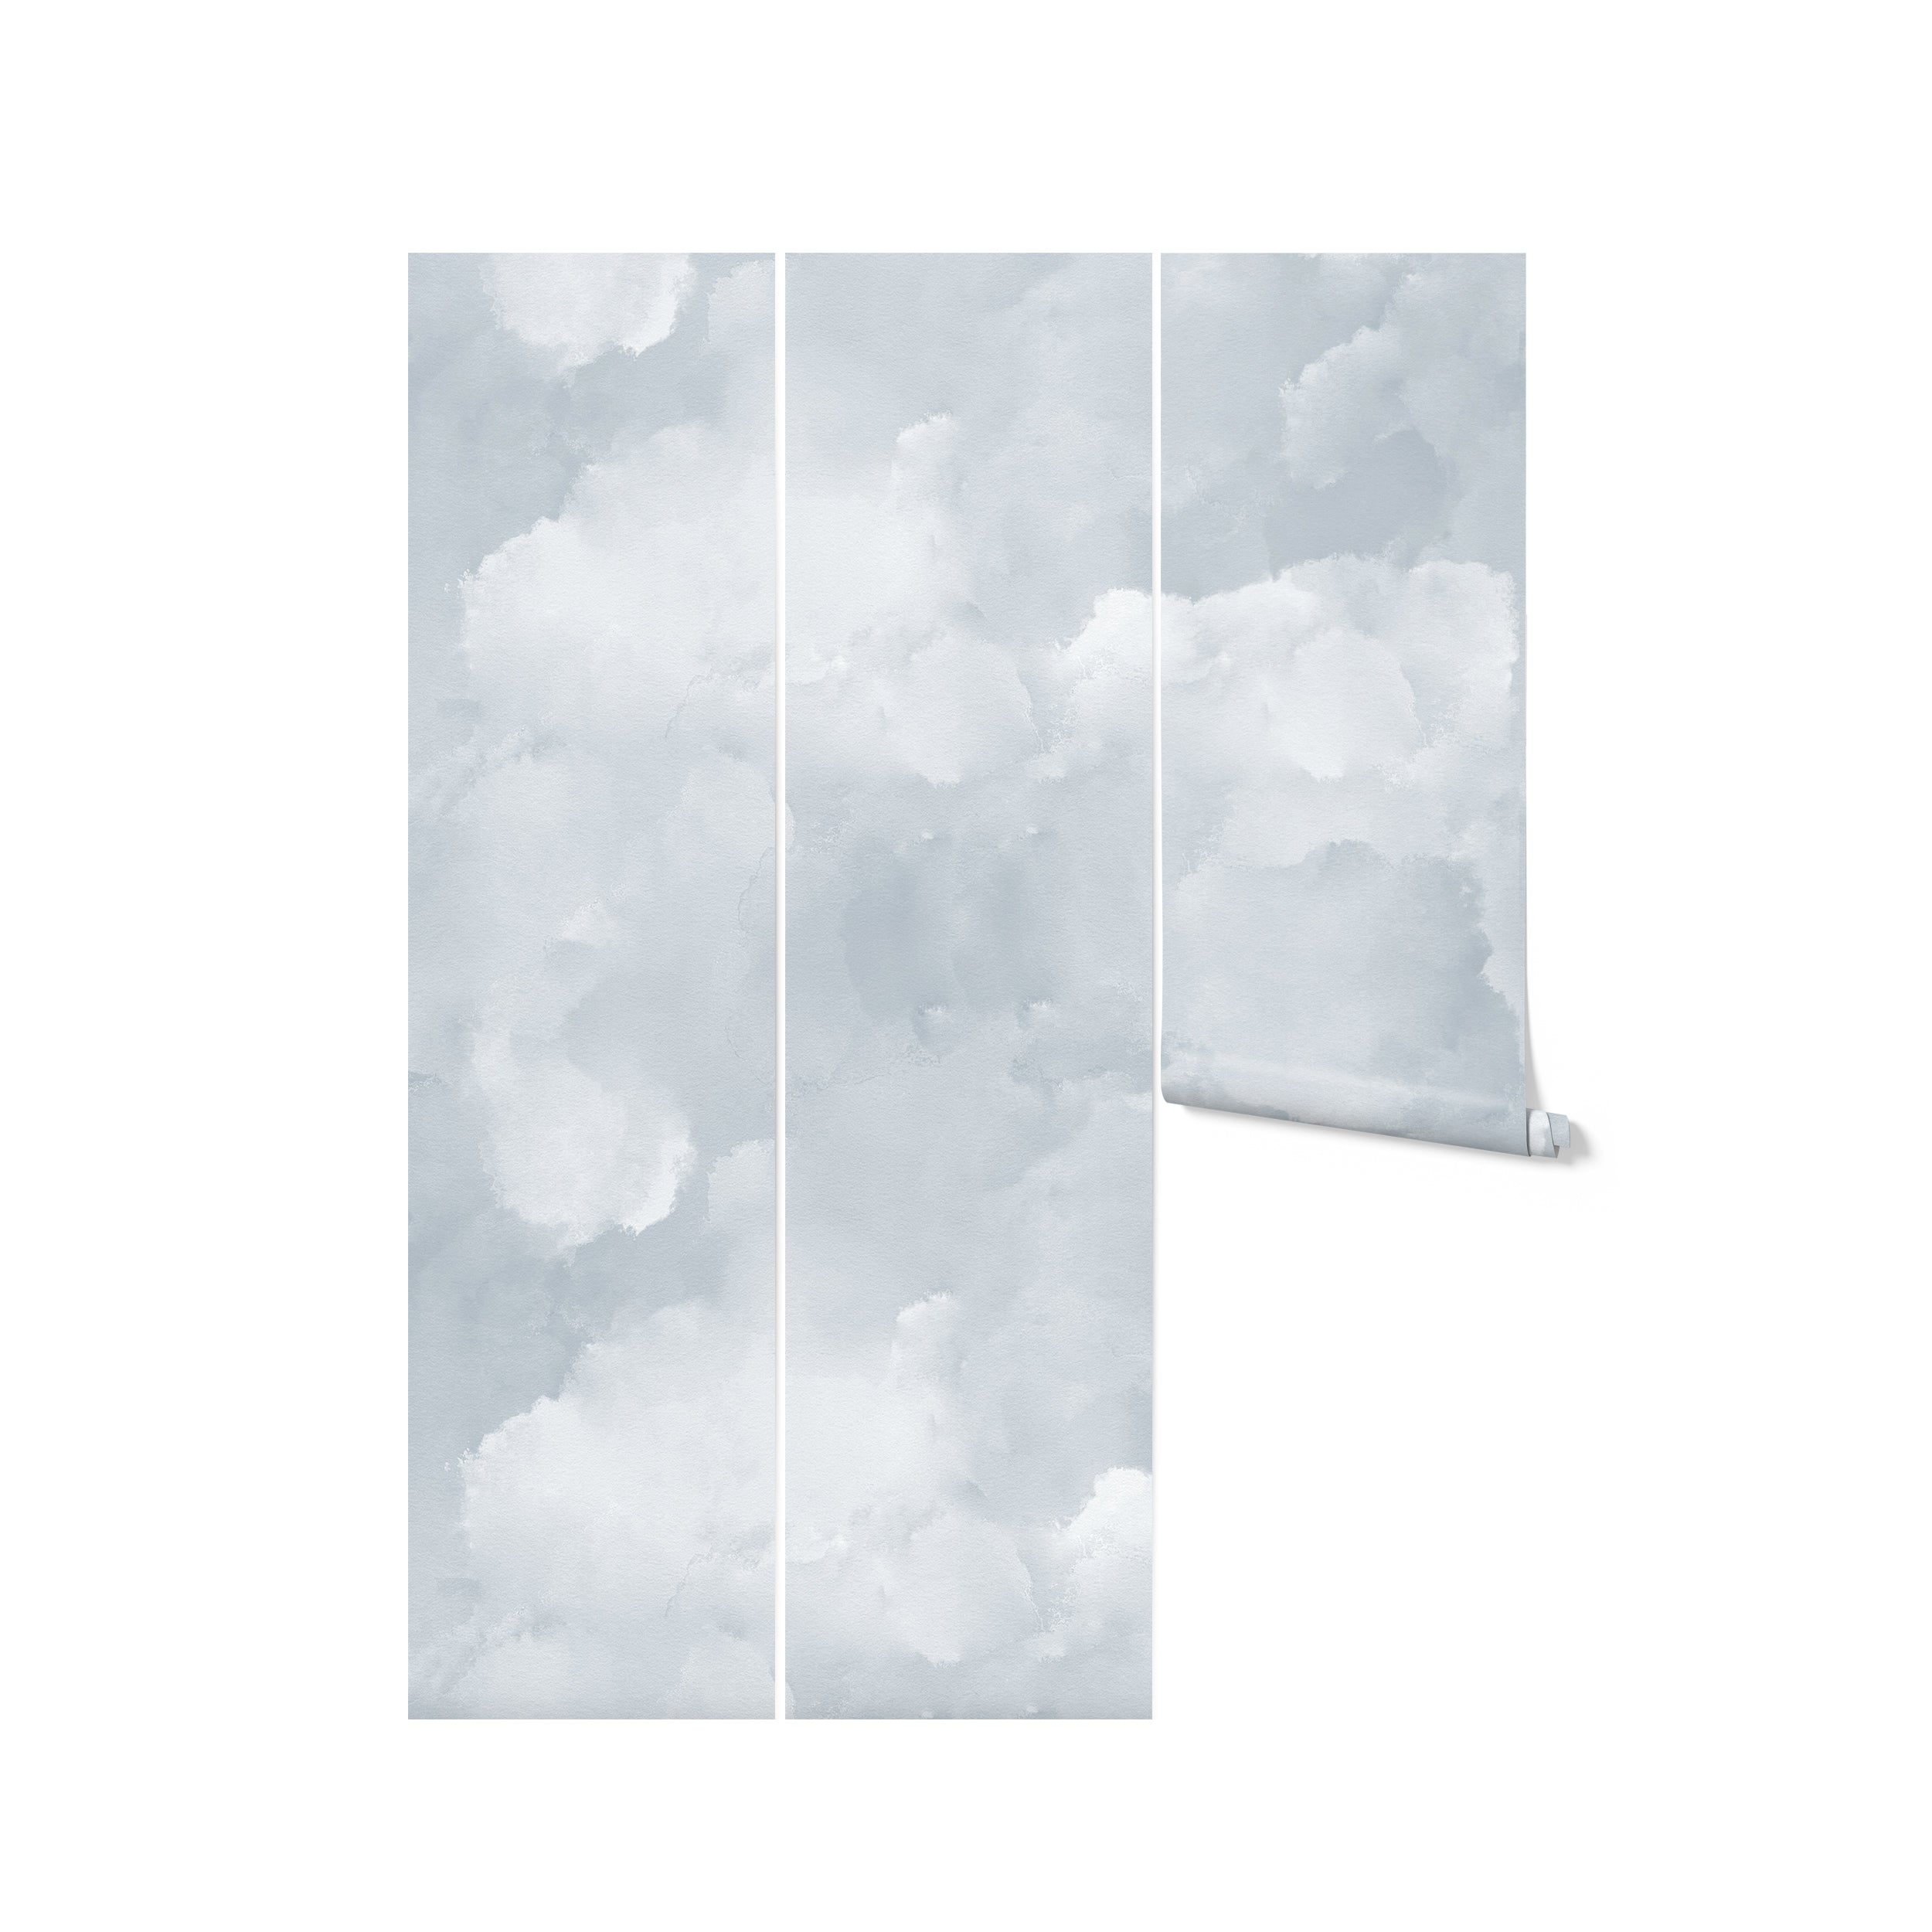 A depiction of the Cloud Mural Wallpaper in Pale Blue shown in three vertical panels with the fourth panel partially rolled, illustrating the wallpaper's full design. The airy cloud pattern provides a soothing and expansive effect, perfect for bringing the essence of the open sky into any interior space.